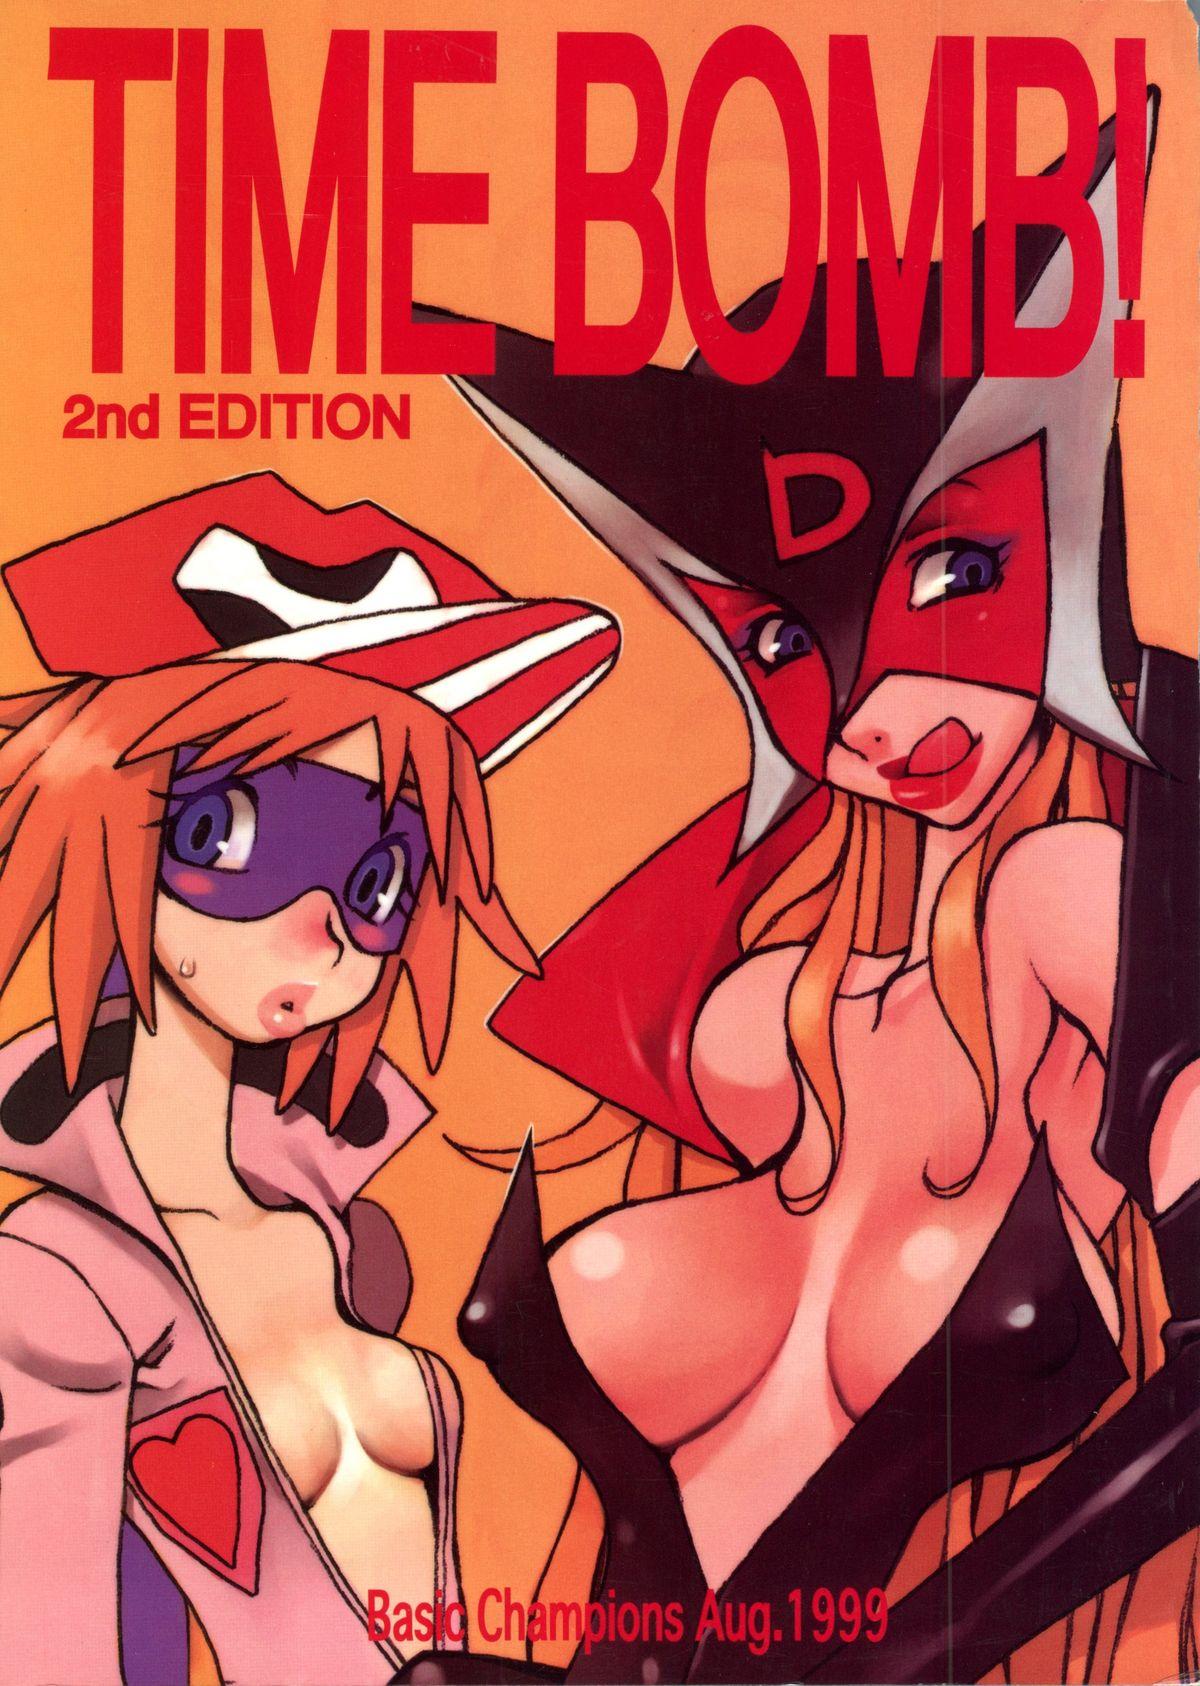 Students TIME BOMB! 2nd Edition - Yatterman Dutch - Page 1